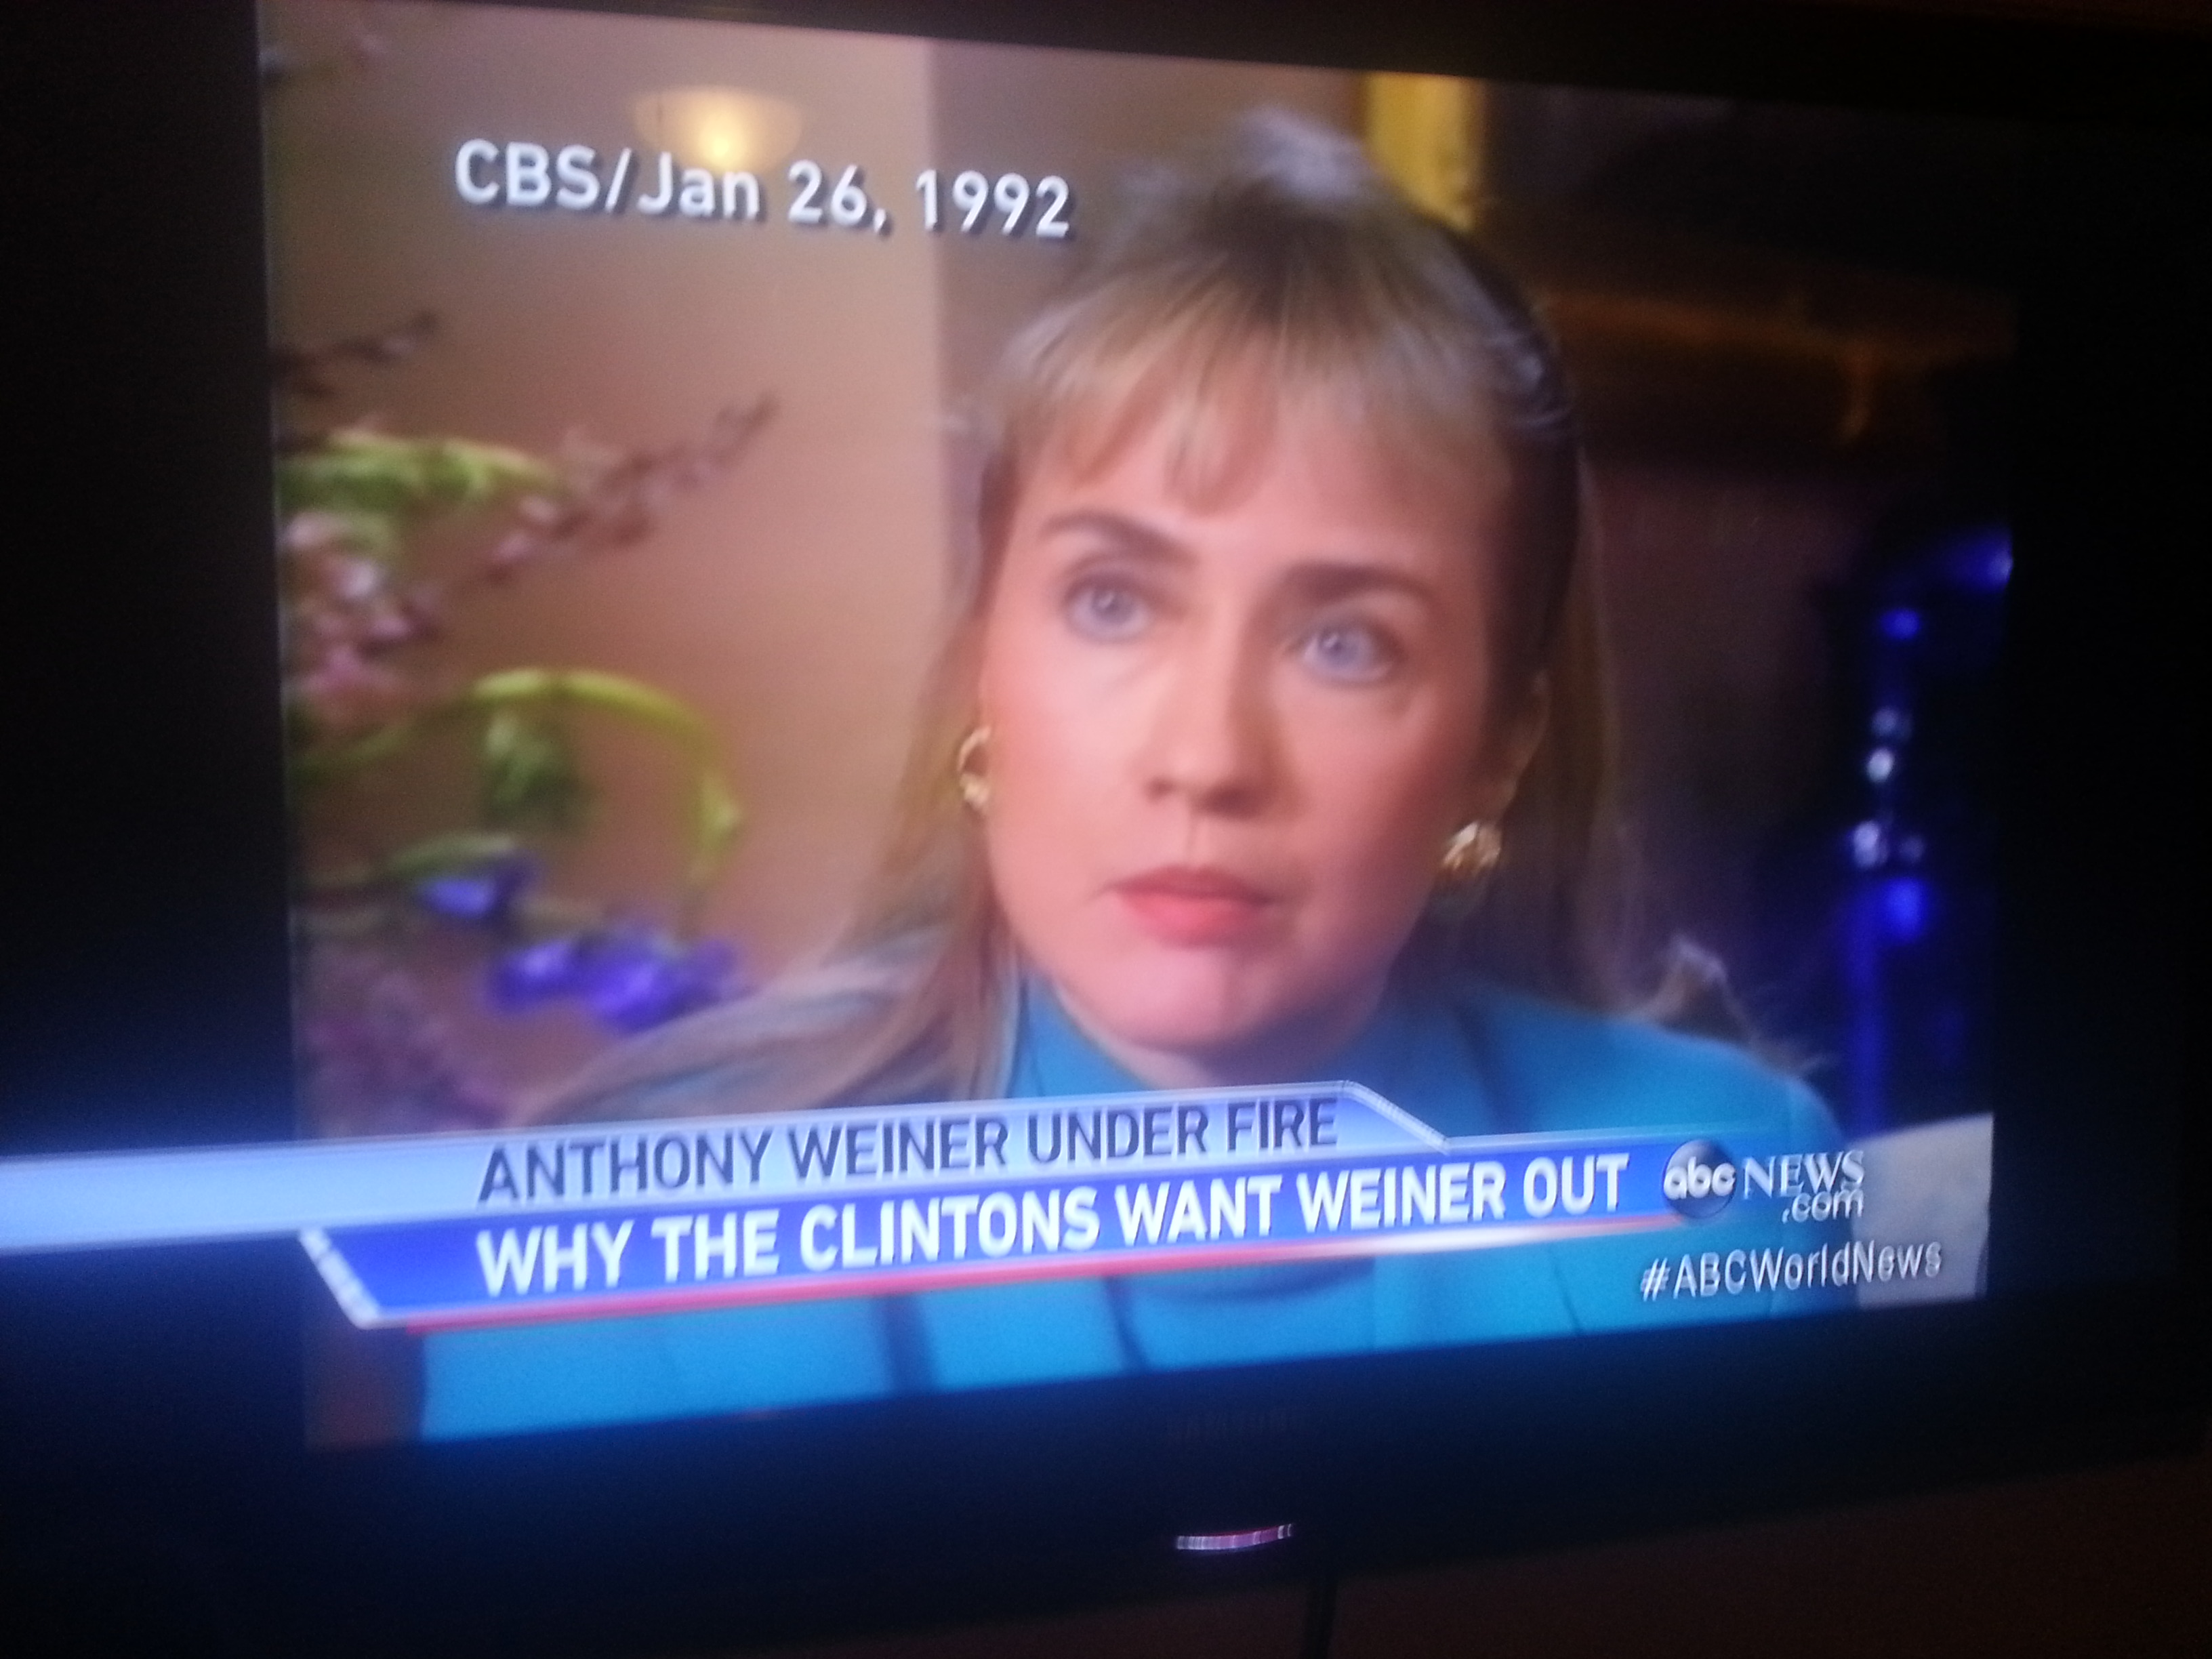 Get the Weiner out of you Hilary!